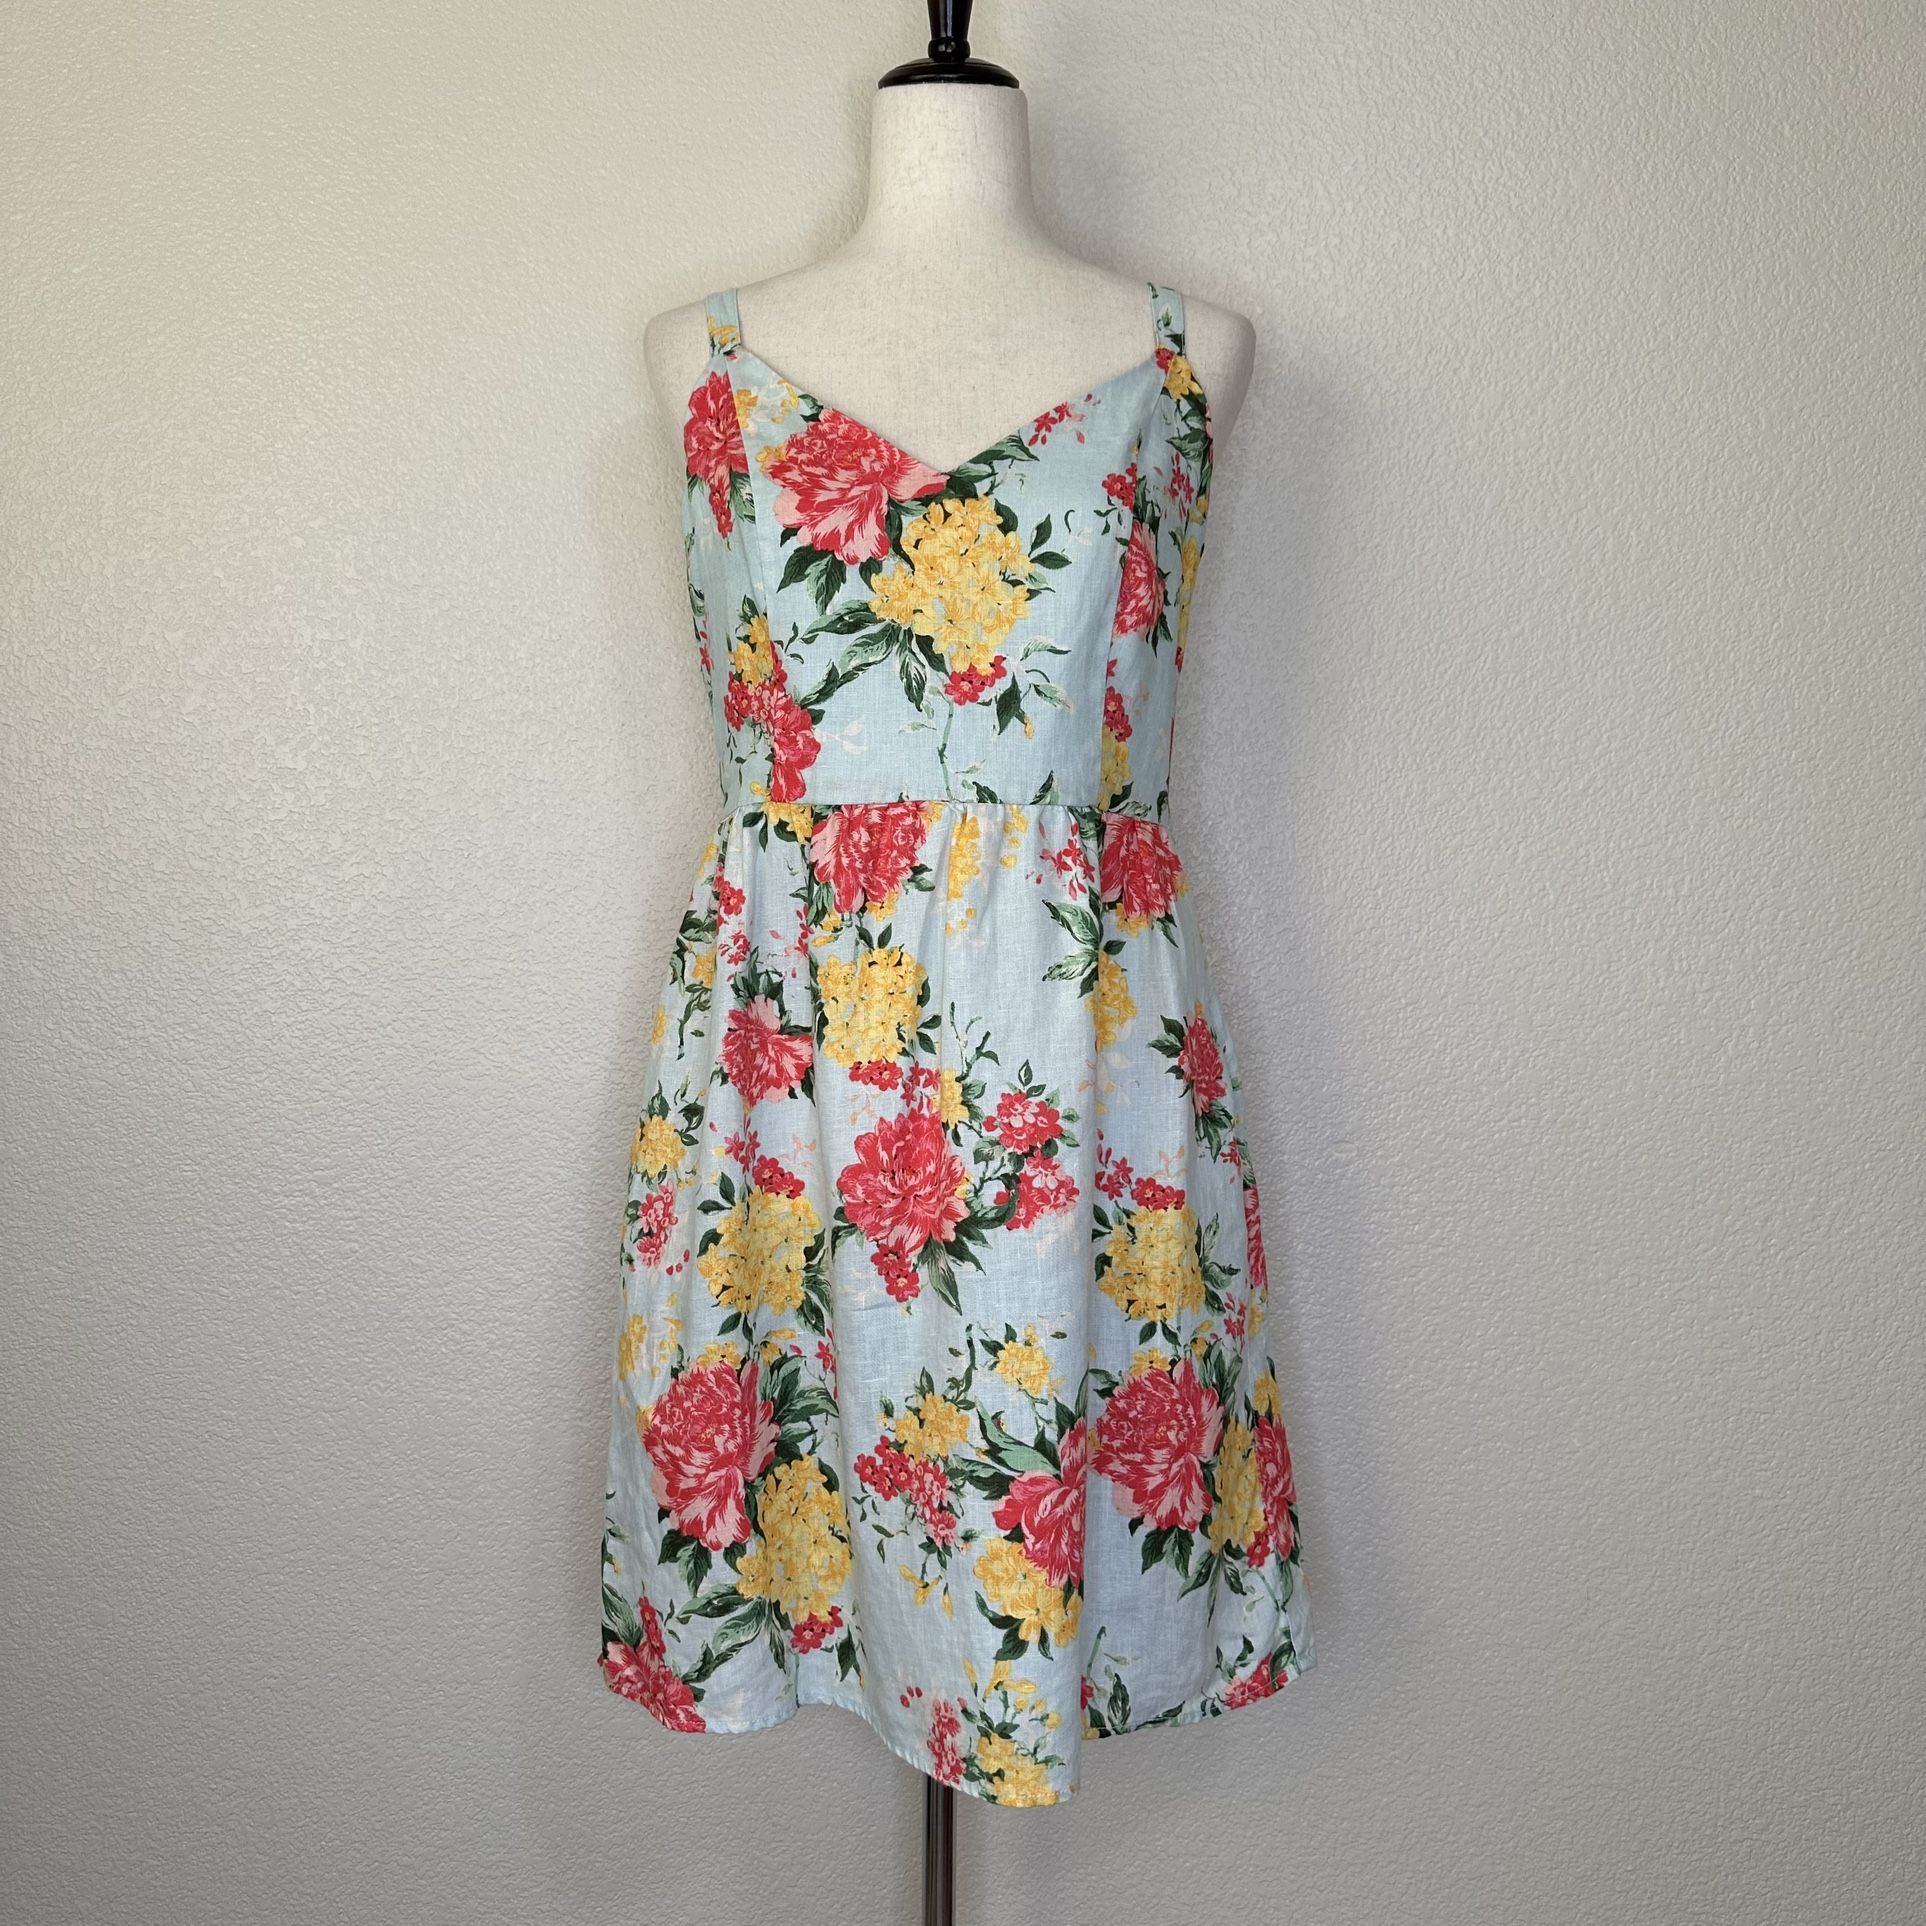 Cynthia Rowley 100% Linen Floral Fit and Flare Dress